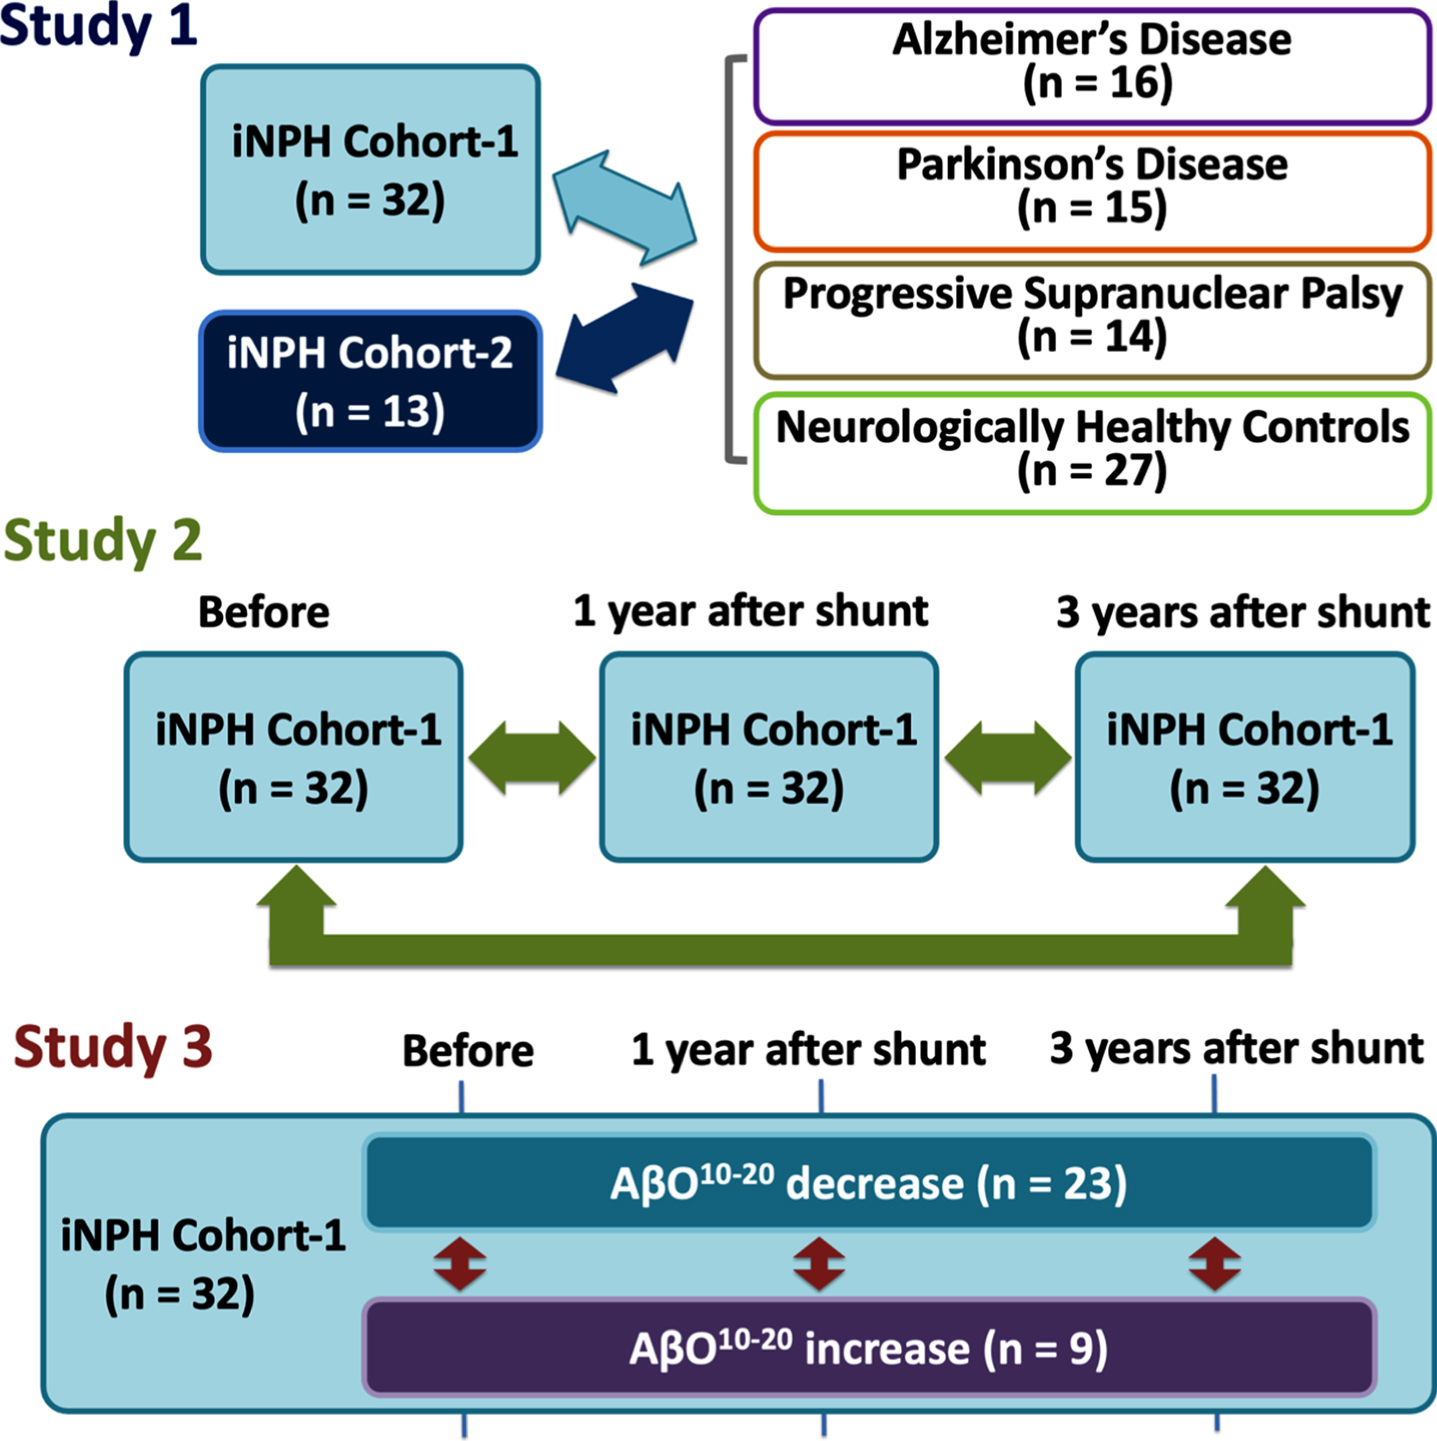 Study designs. First, we compared iNPH cohorts with comparison cohorts: AD, PD, PSP, and HCs (Study 1). Second, we compared iNPH cohort-1’s measurement before and after CSF shunting (Study 2). Third, we subdivided iNPH cohort-1 members into AβO10–20 decrease or increase subgroups and compared them in terms of biomarkers and neurological statuses at before and 1 and 3 years after CSF shunting (Study 3). AD, Alzheimer’s disease; AβO10–20, amyloid-β oligomer10–20; CSF, cerebrospinal fluid; iNPH, idiopathic normal pressure hydrocephalus; HCs, healthy controls; PD, Parkinson’s disease; PSP, progressive supranuclear palsy.